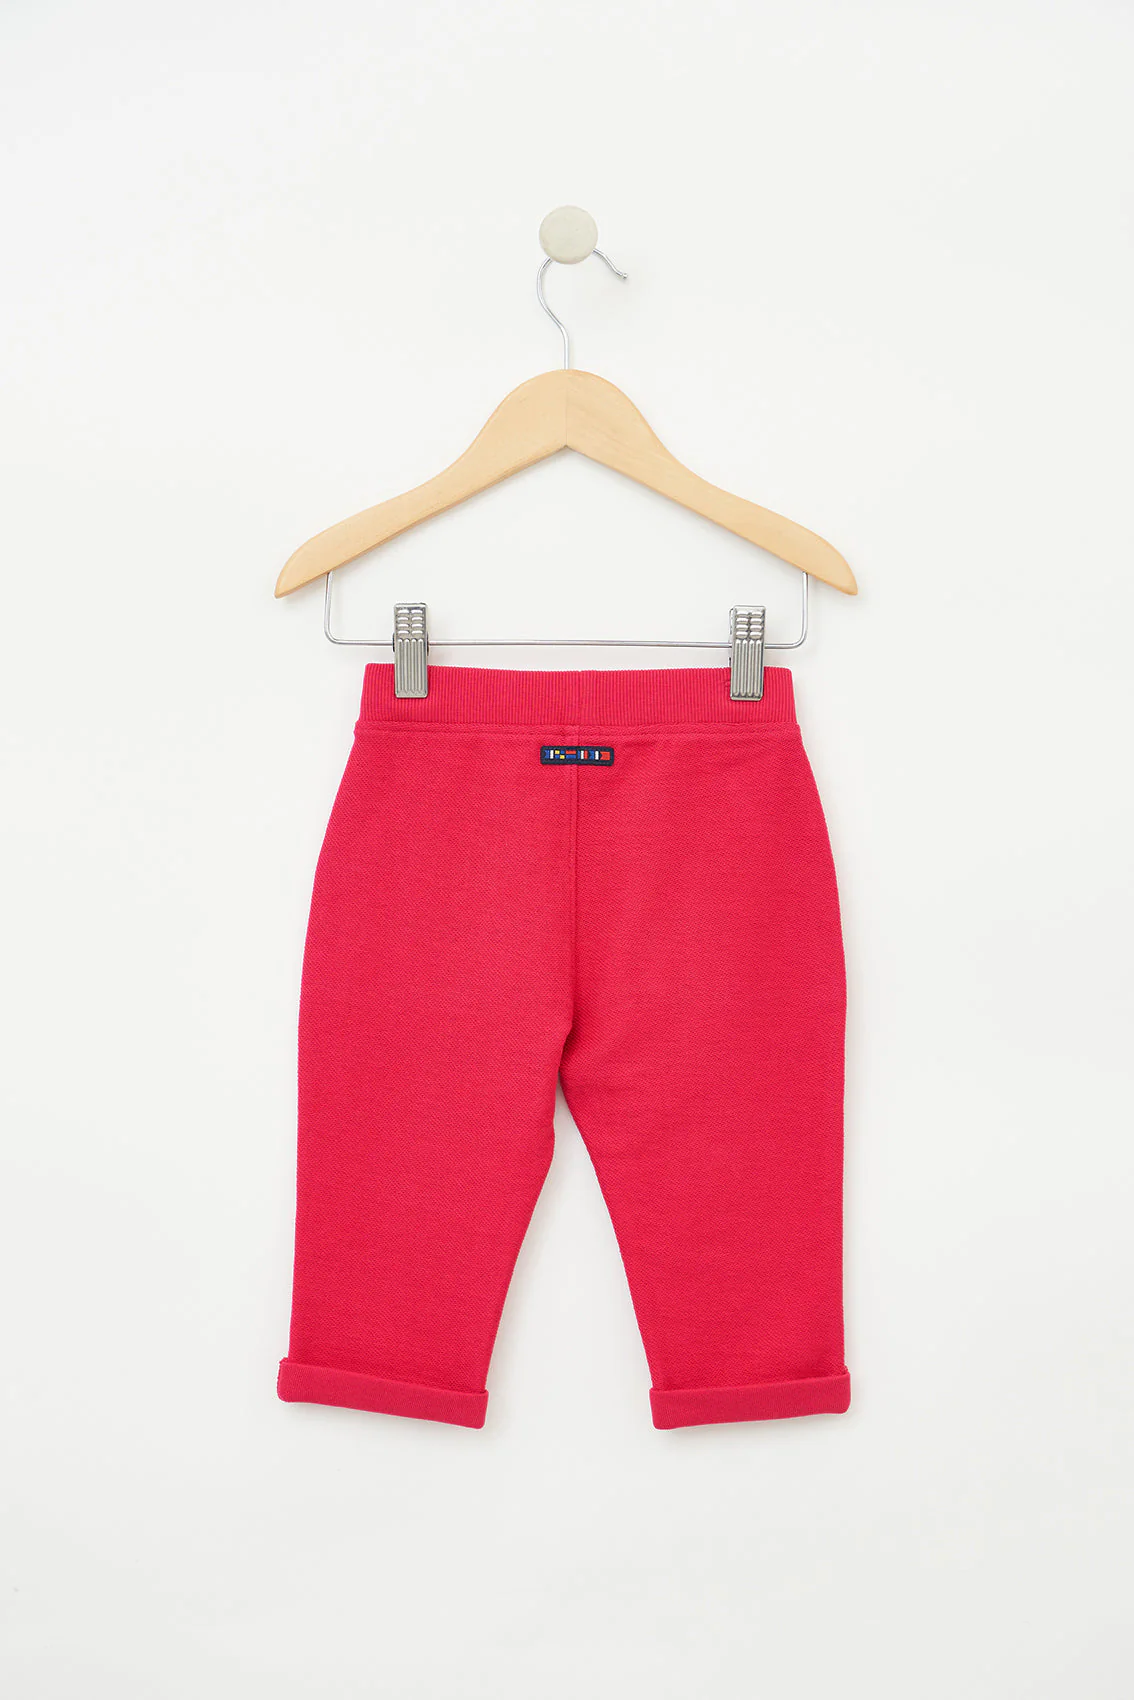 Batela Terry Cotton Trousers - Red